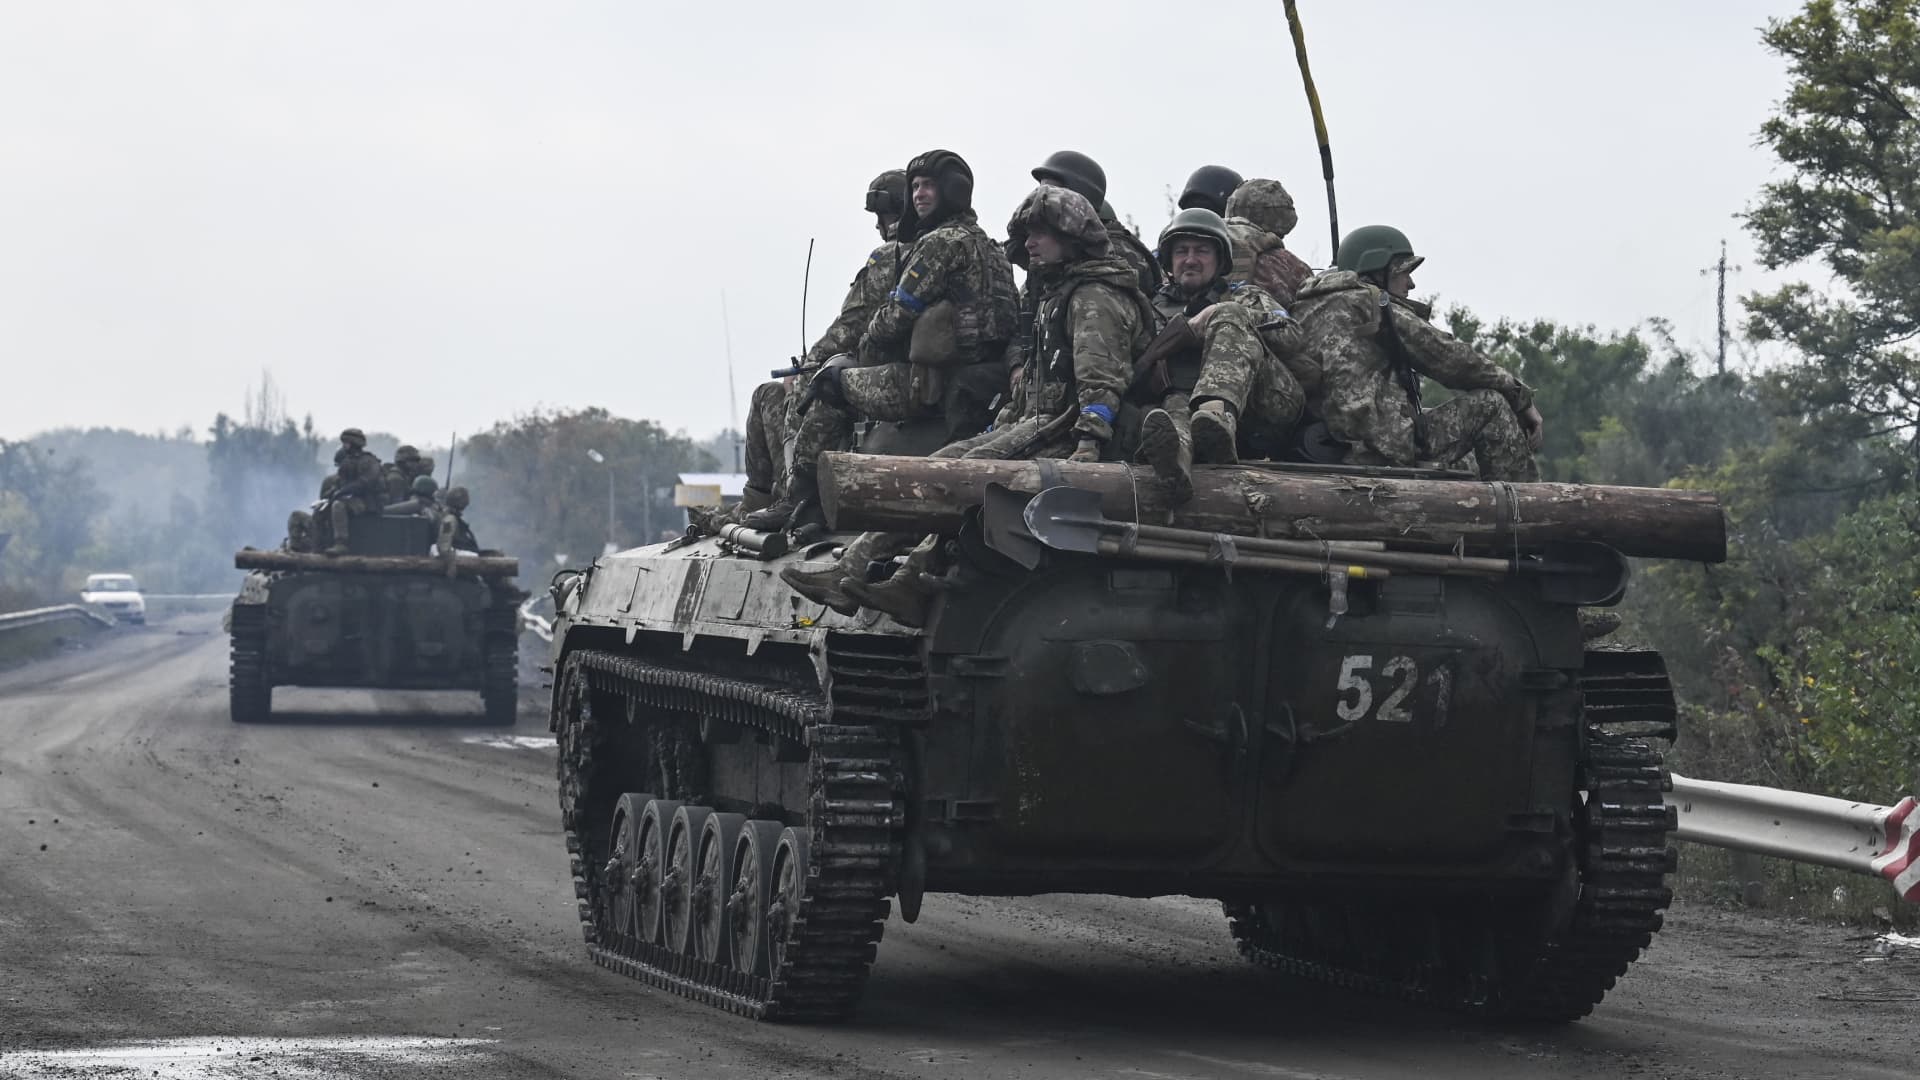 Ukraine’s allies see risk in Russia’s response to battlefield failures